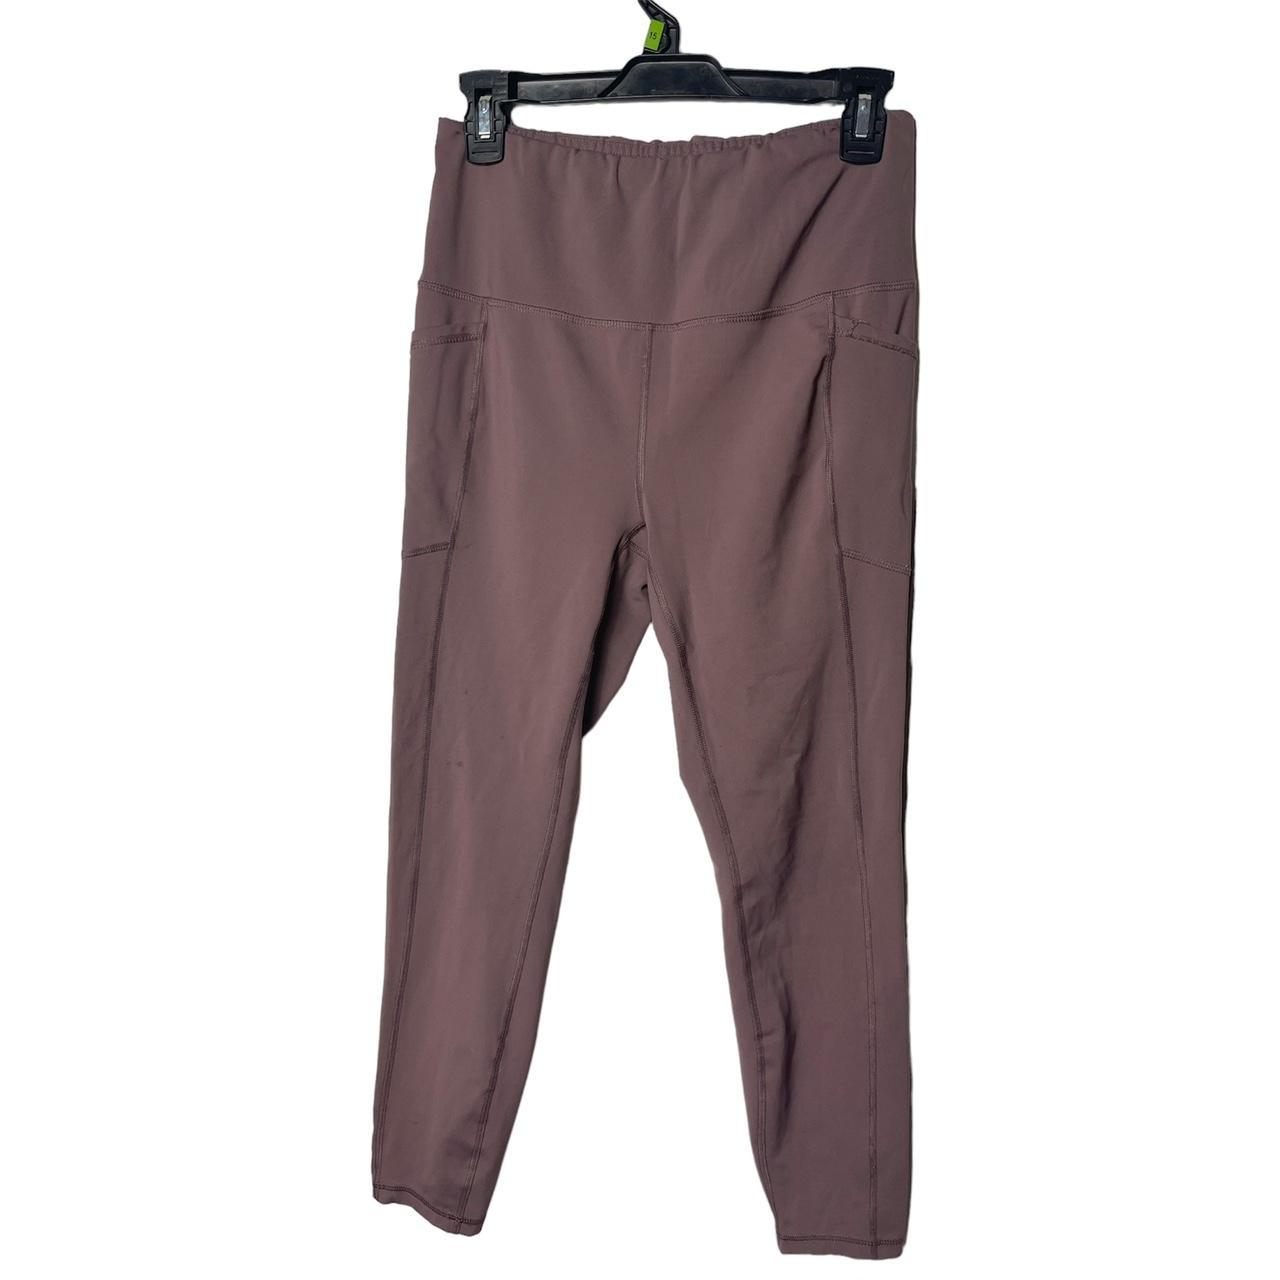 Athletic Pants By Rbx Size: S